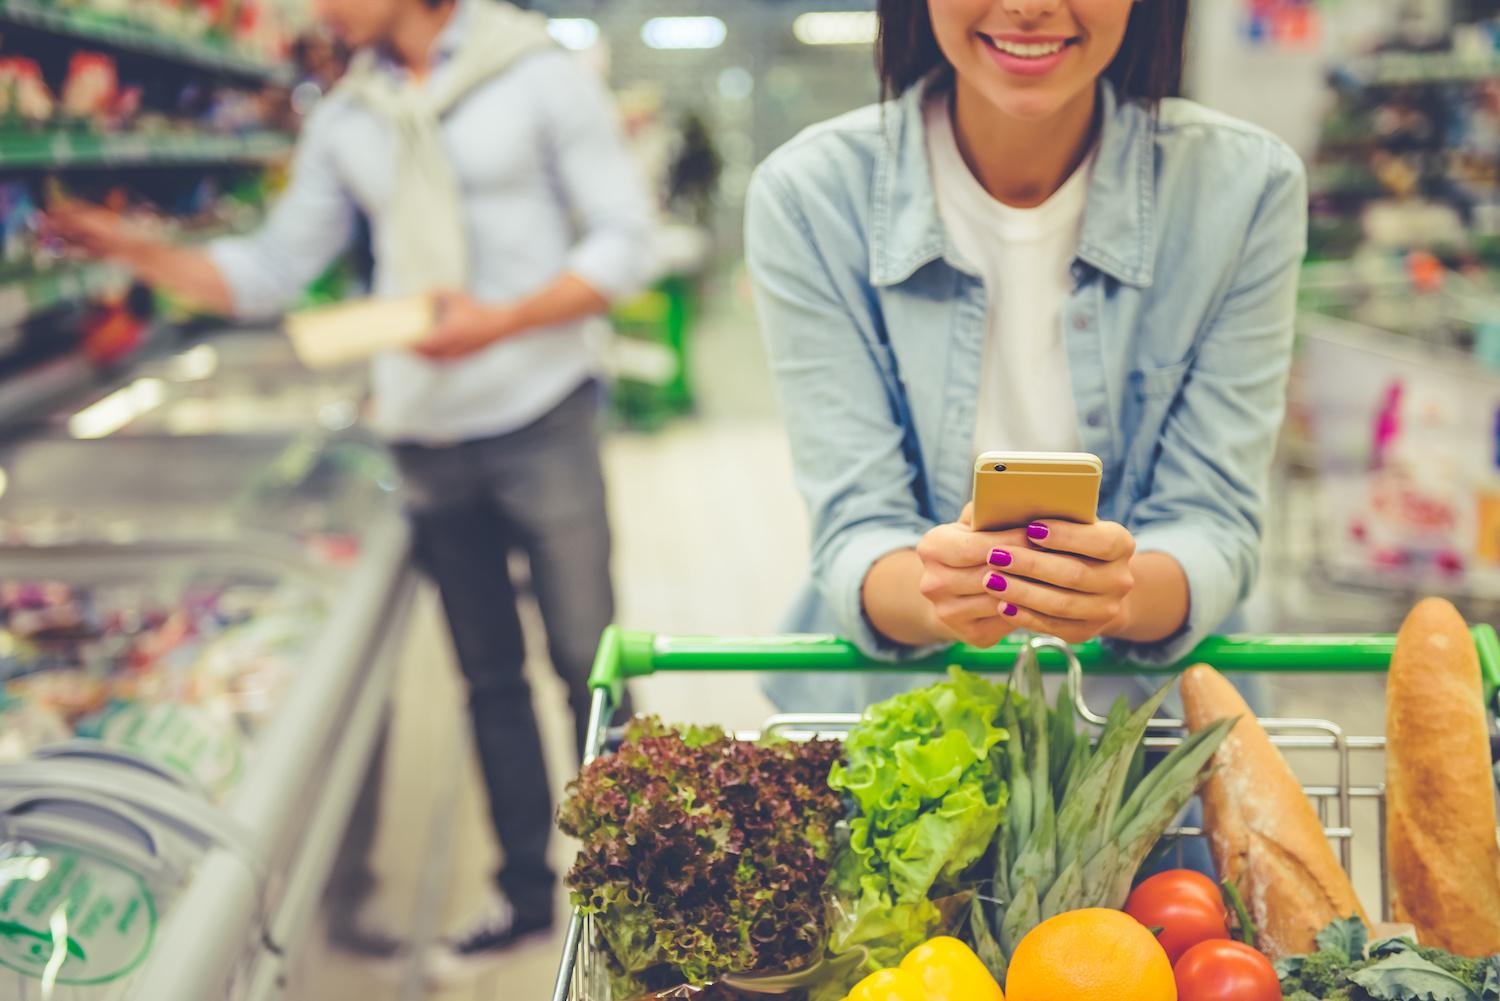 couple shopping in the grocery store - what ESG issues matter to consumers as they shop